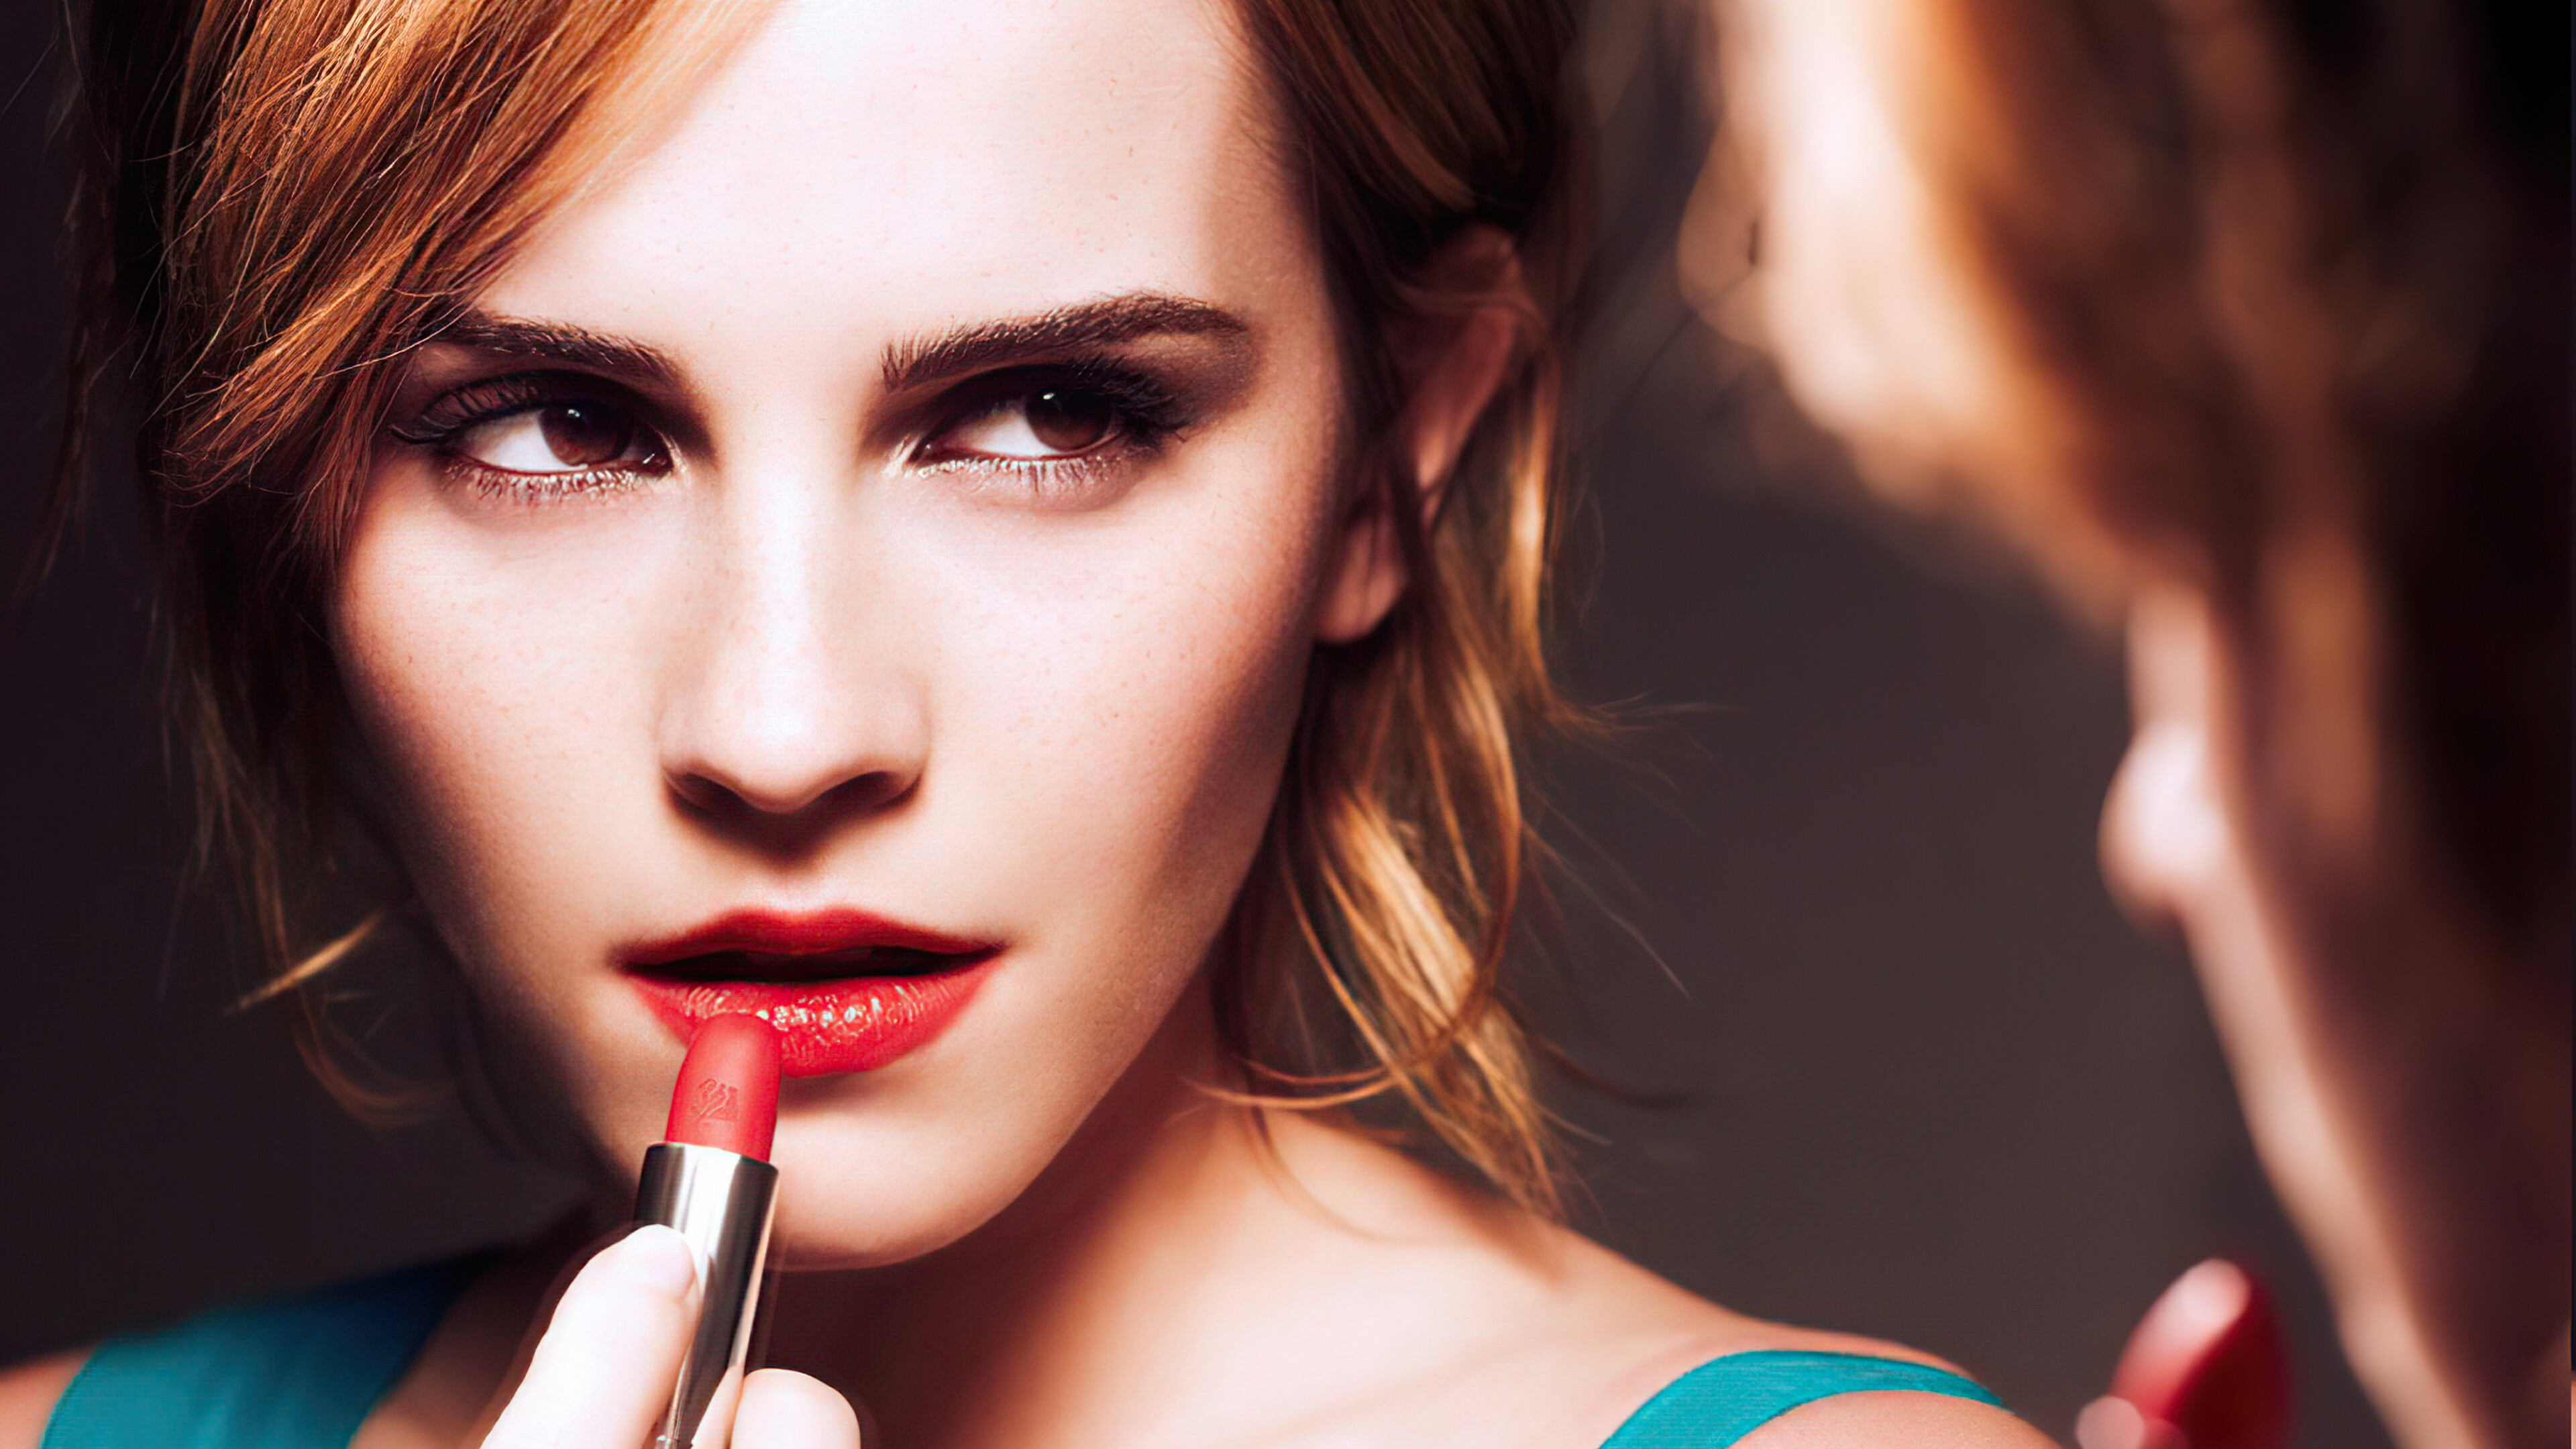 Lipstick: Emma Watson putting on red lip coloring, An English actress, The world's highest-paid actresses (Forbes). 3840x2160 4K Wallpaper.